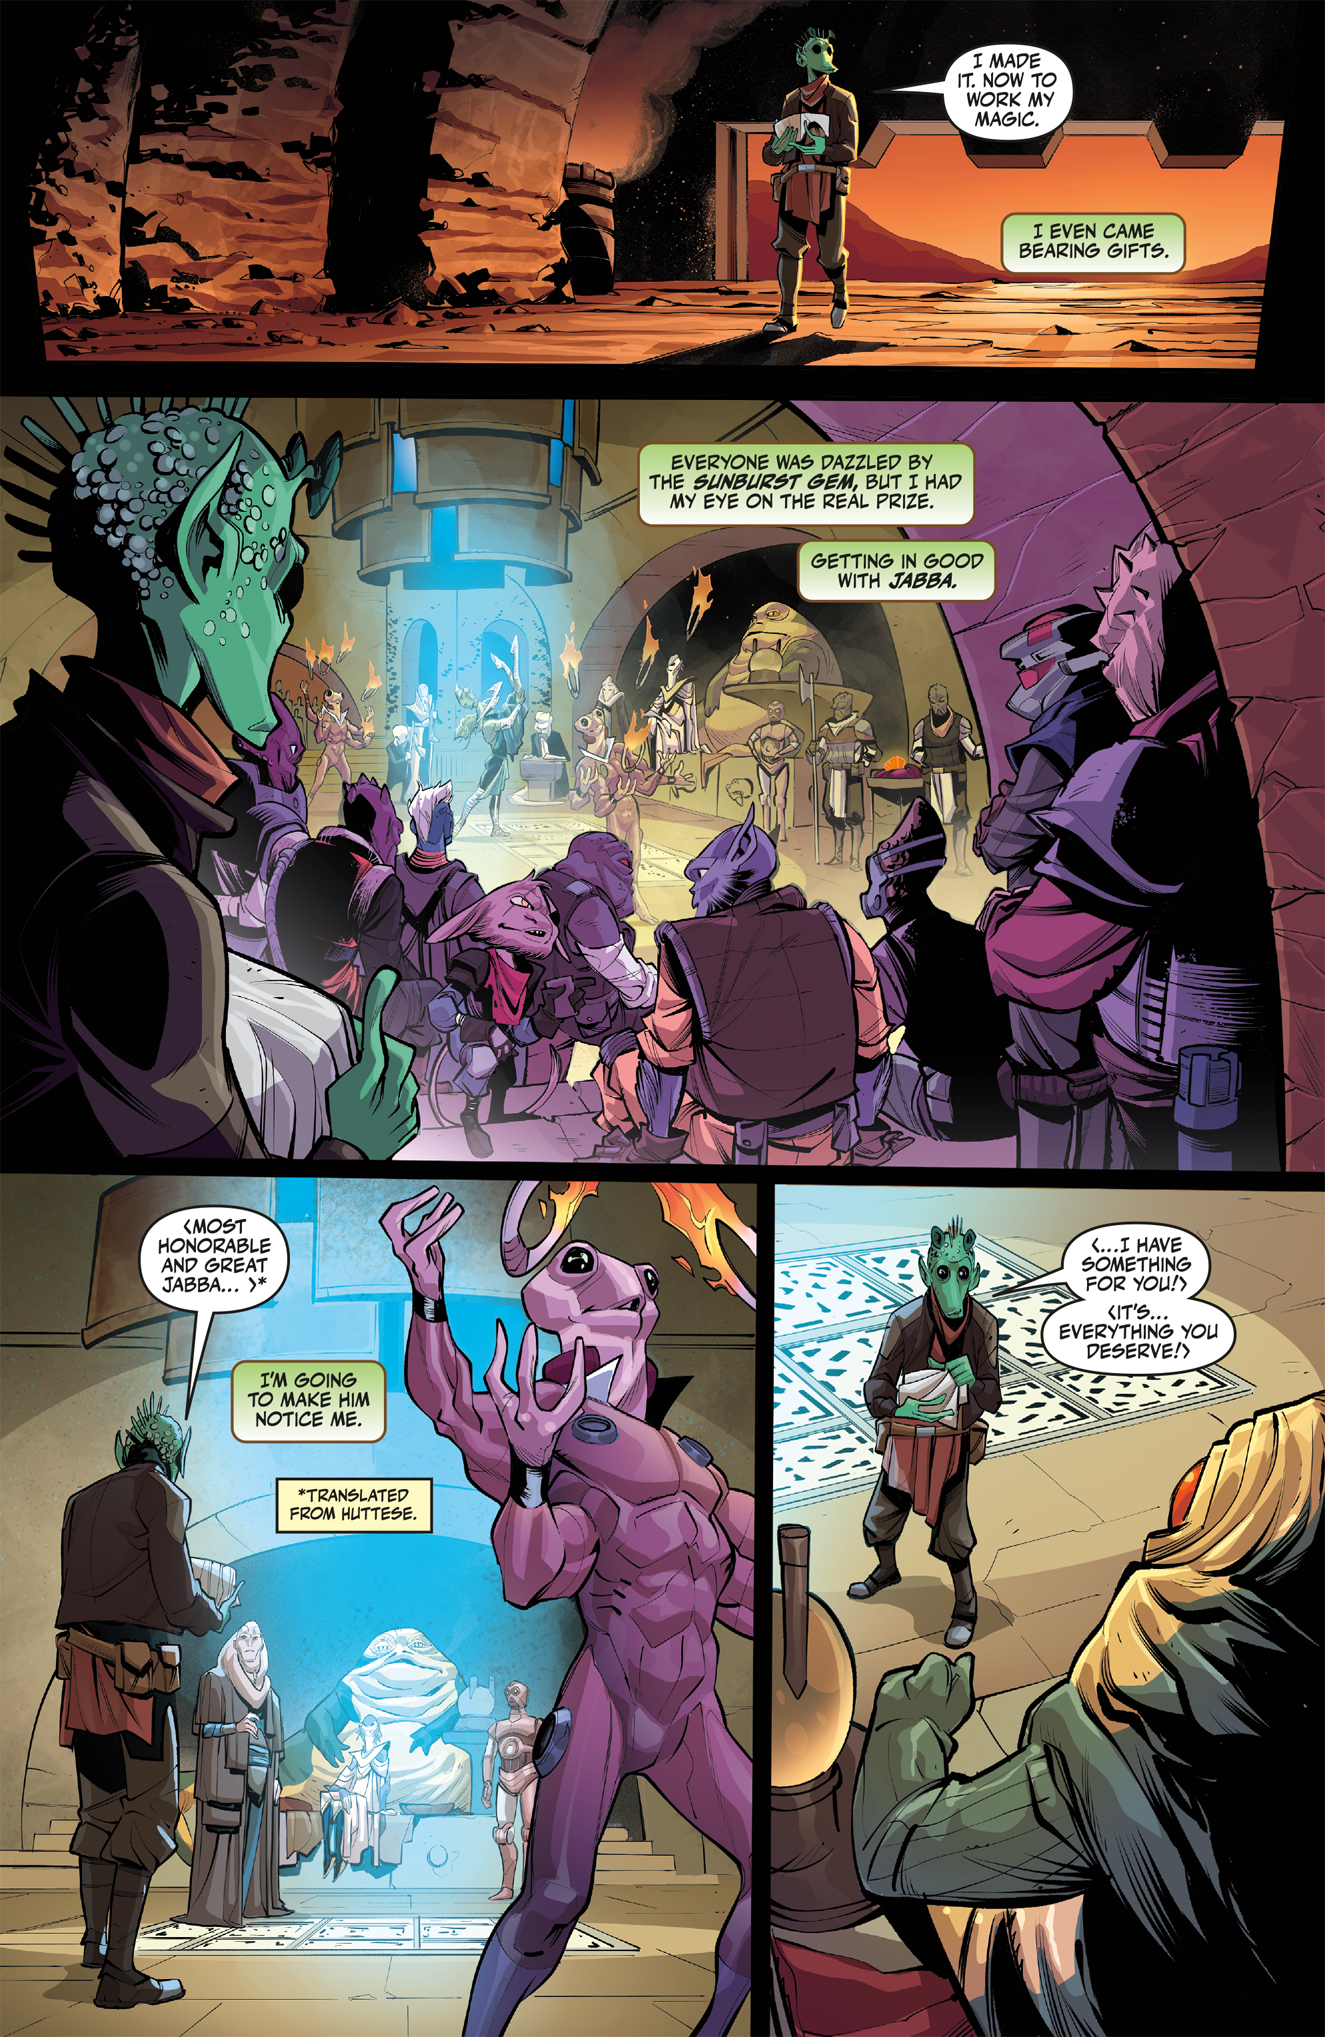 Hyperspace Stories Issue 6 Page 2 -Greedo approaches Jabba